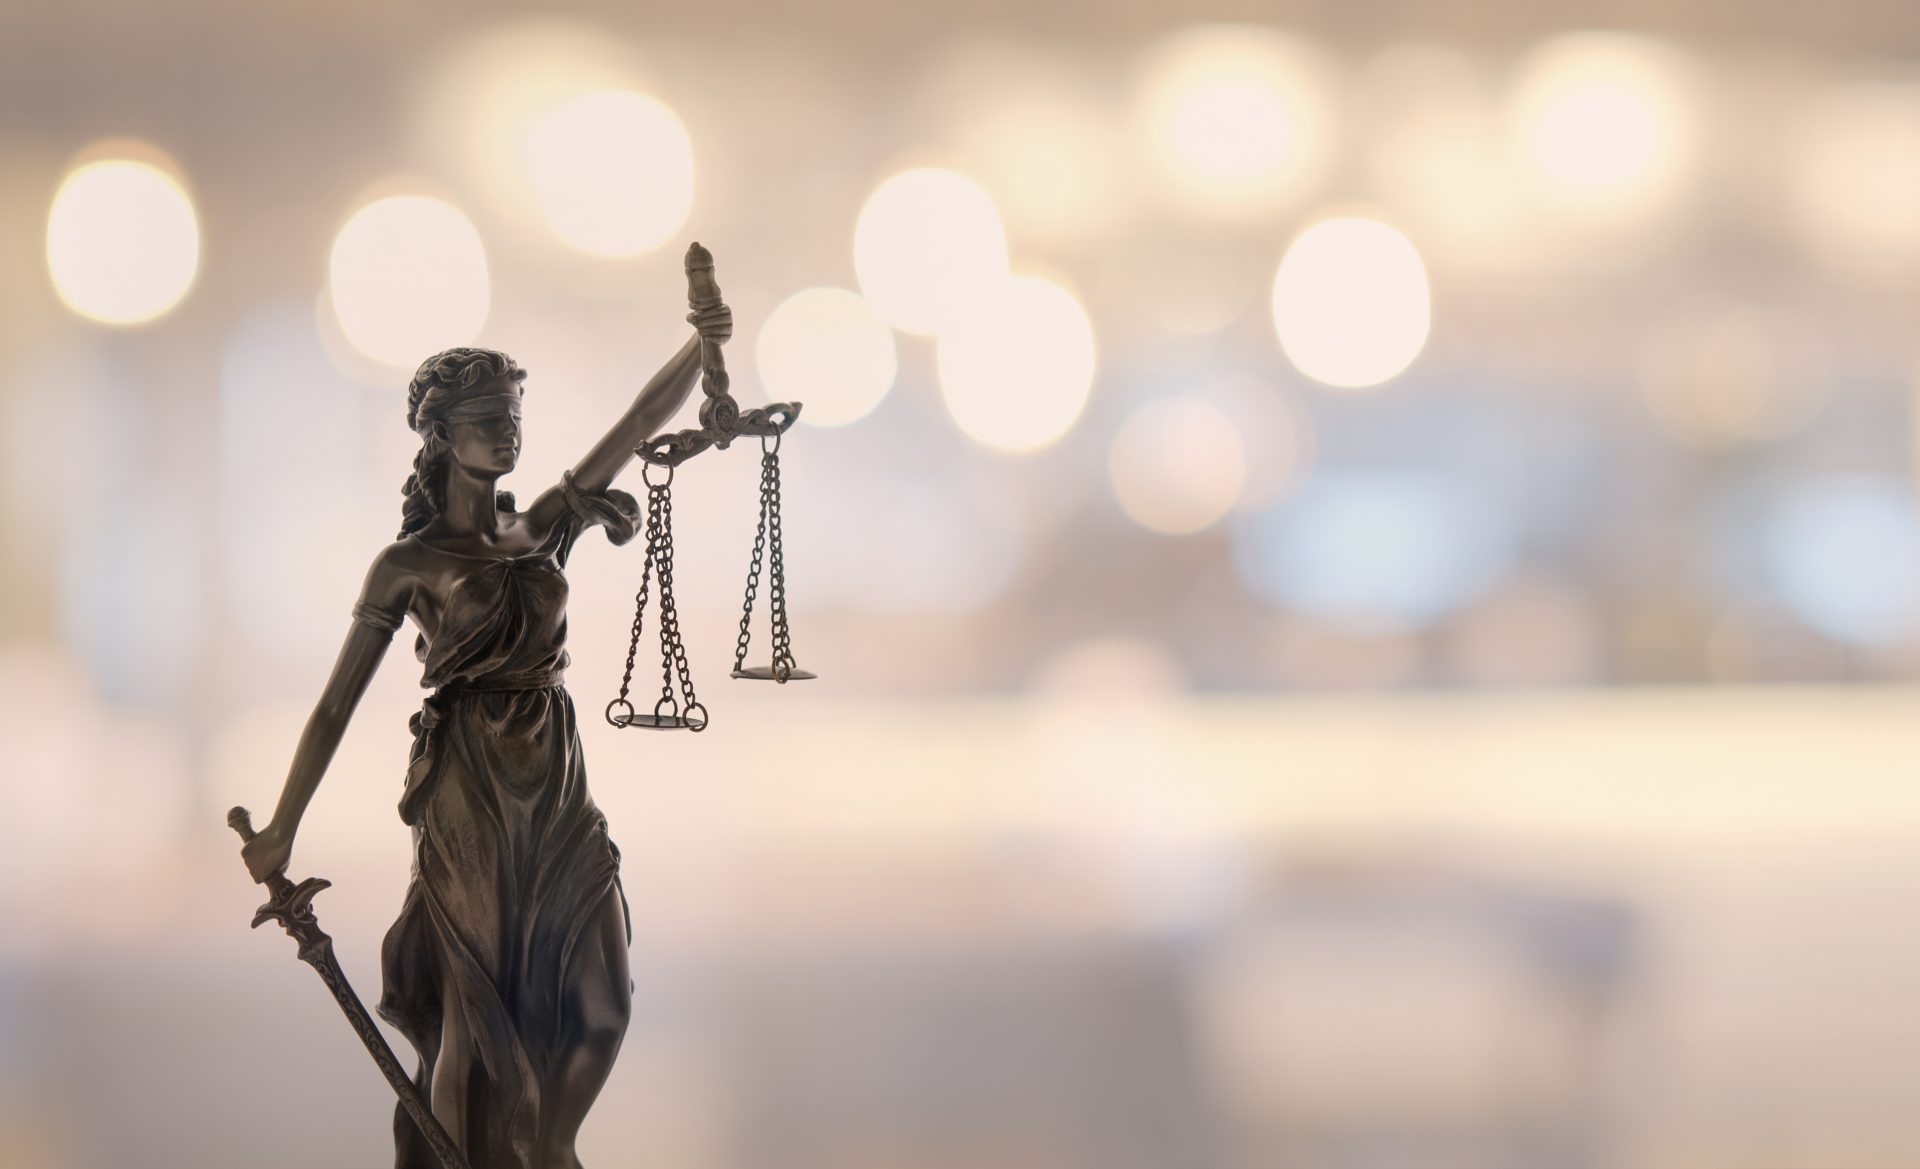 Statue of Justice against blurred background